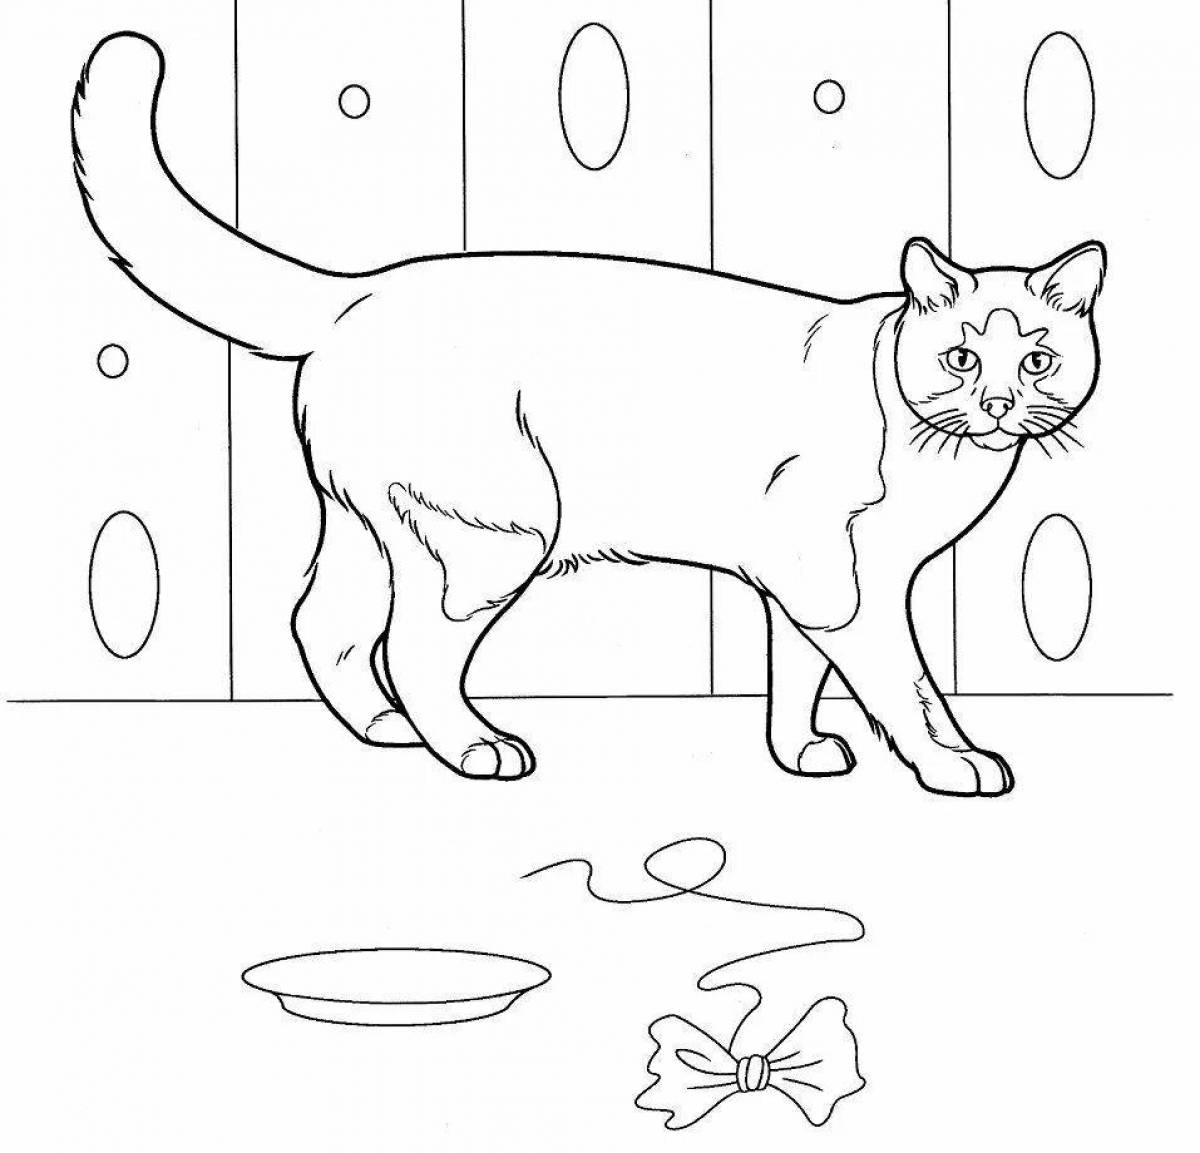 Coloring book playful wooden cat